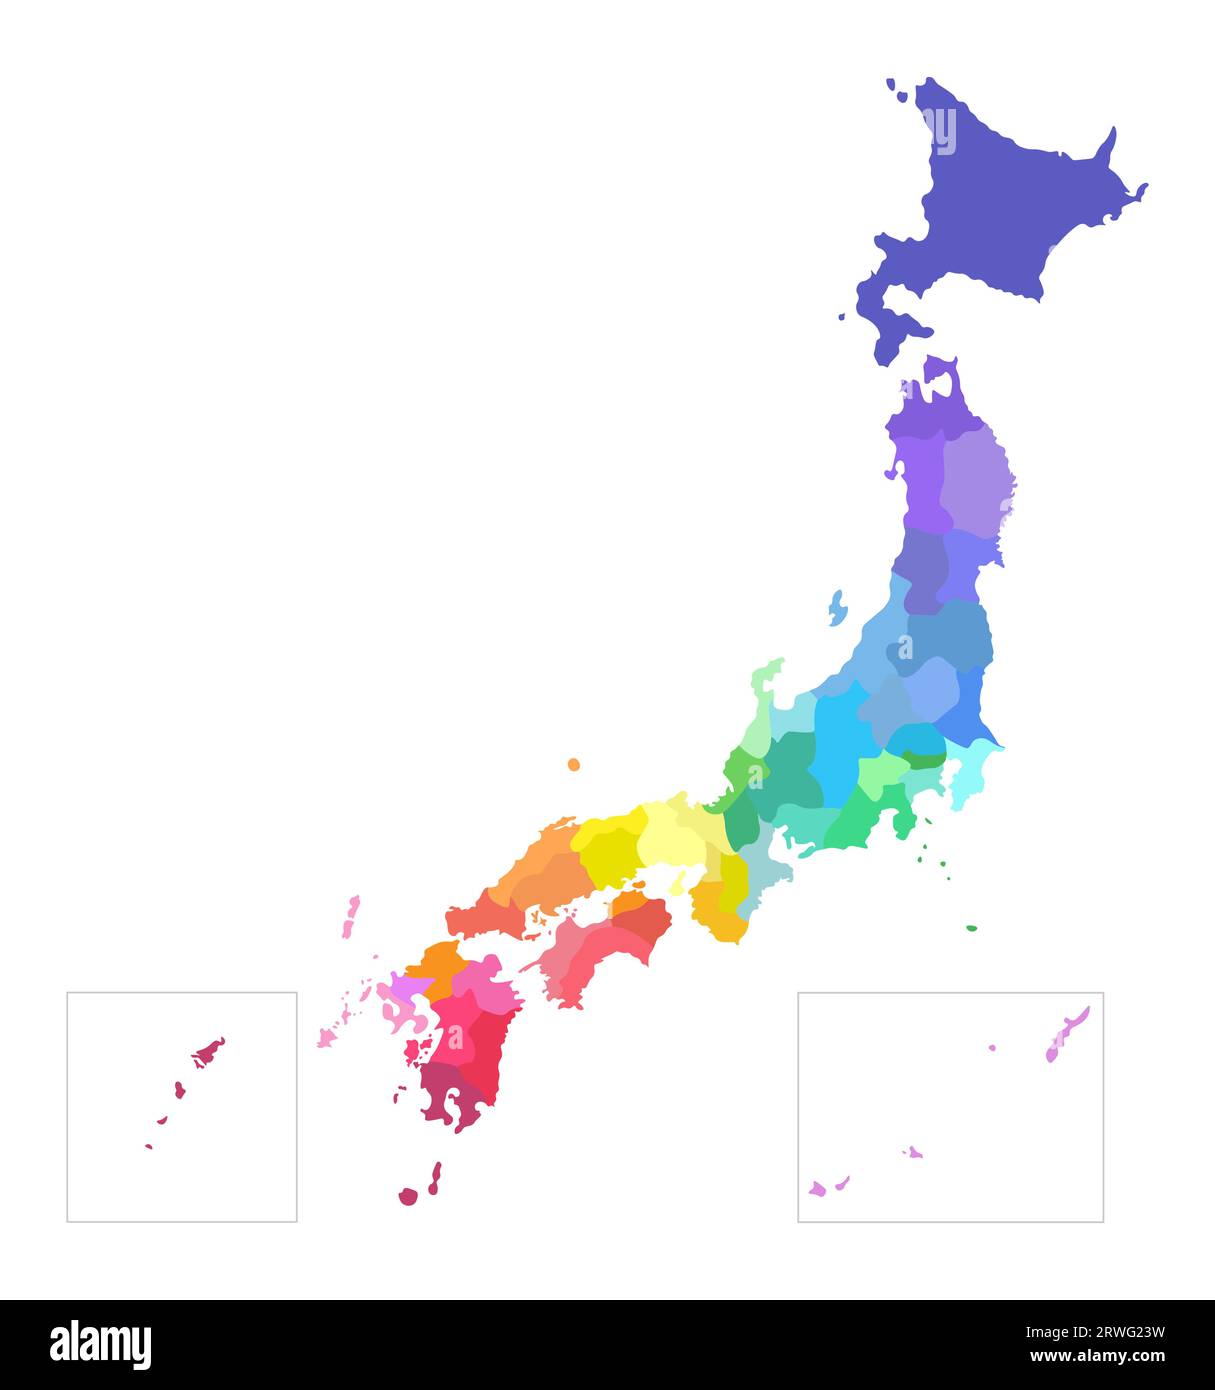 Vector isolated illustration of simplified administrative map of Japan. Borders of the prefectures. Multi colored silhouettes. Stock Vector